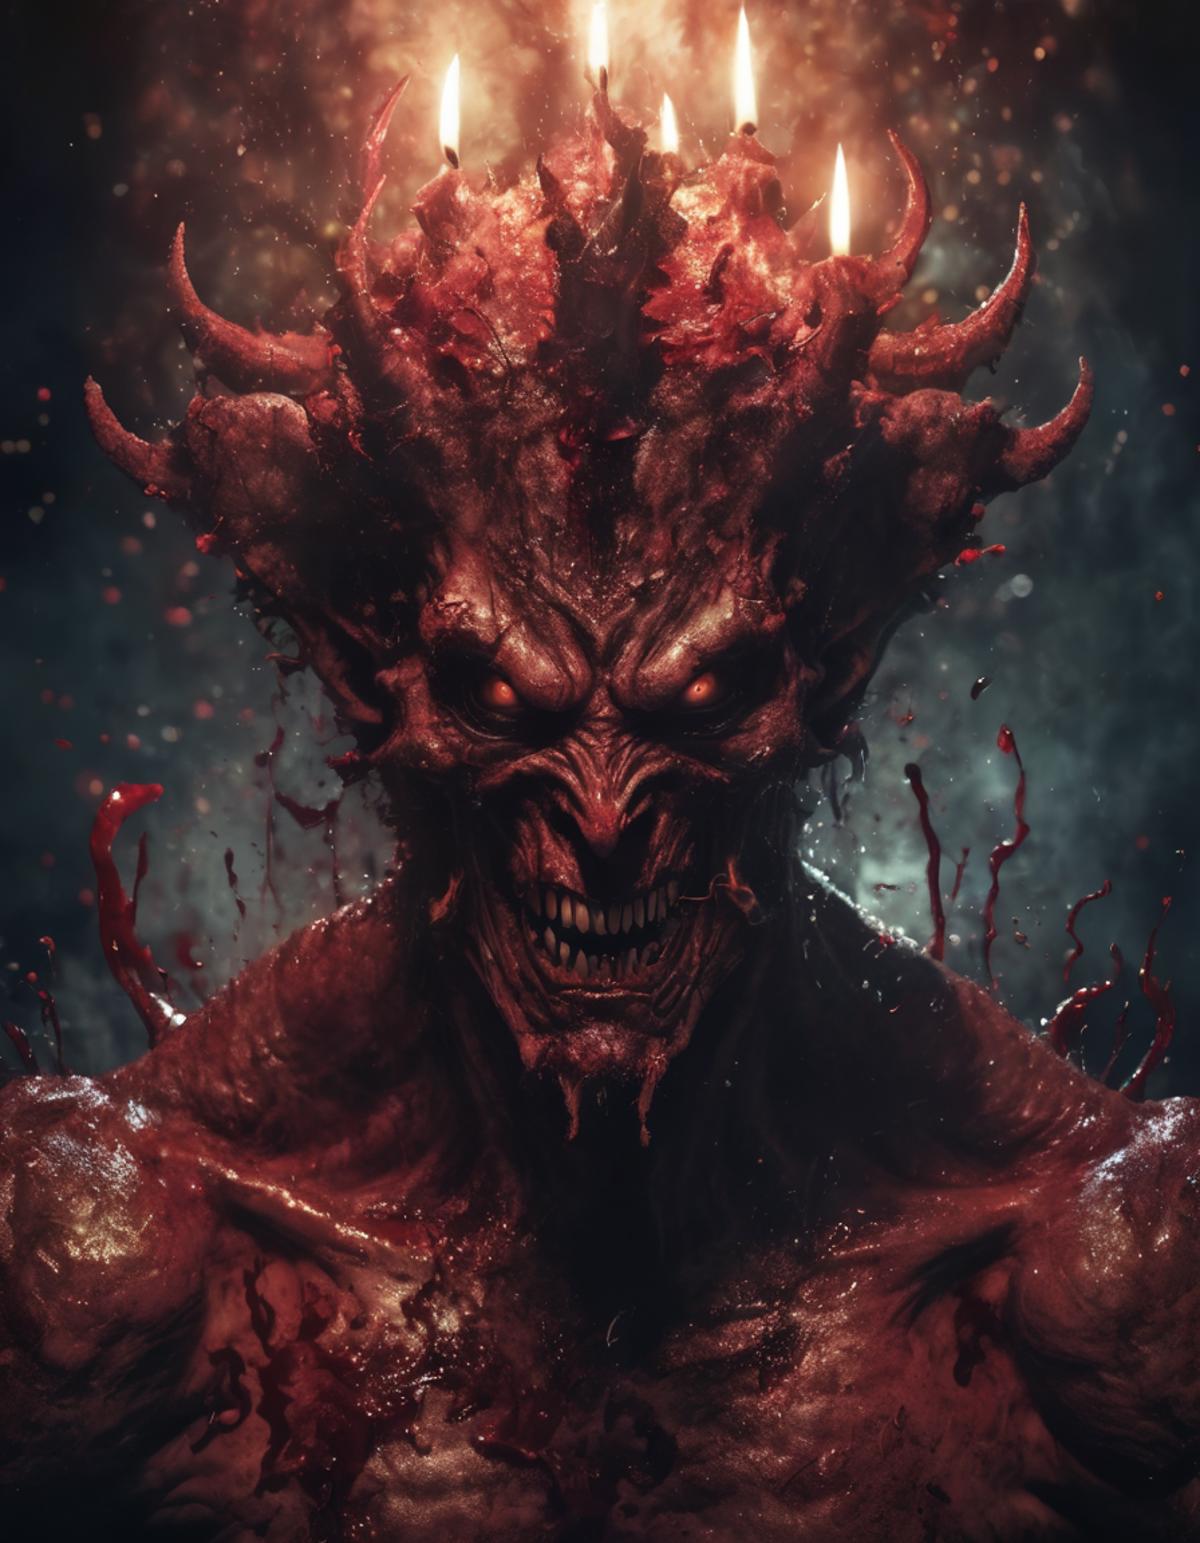 Horrific Demon with Horns, Blood, and Fire in a Dark Setting